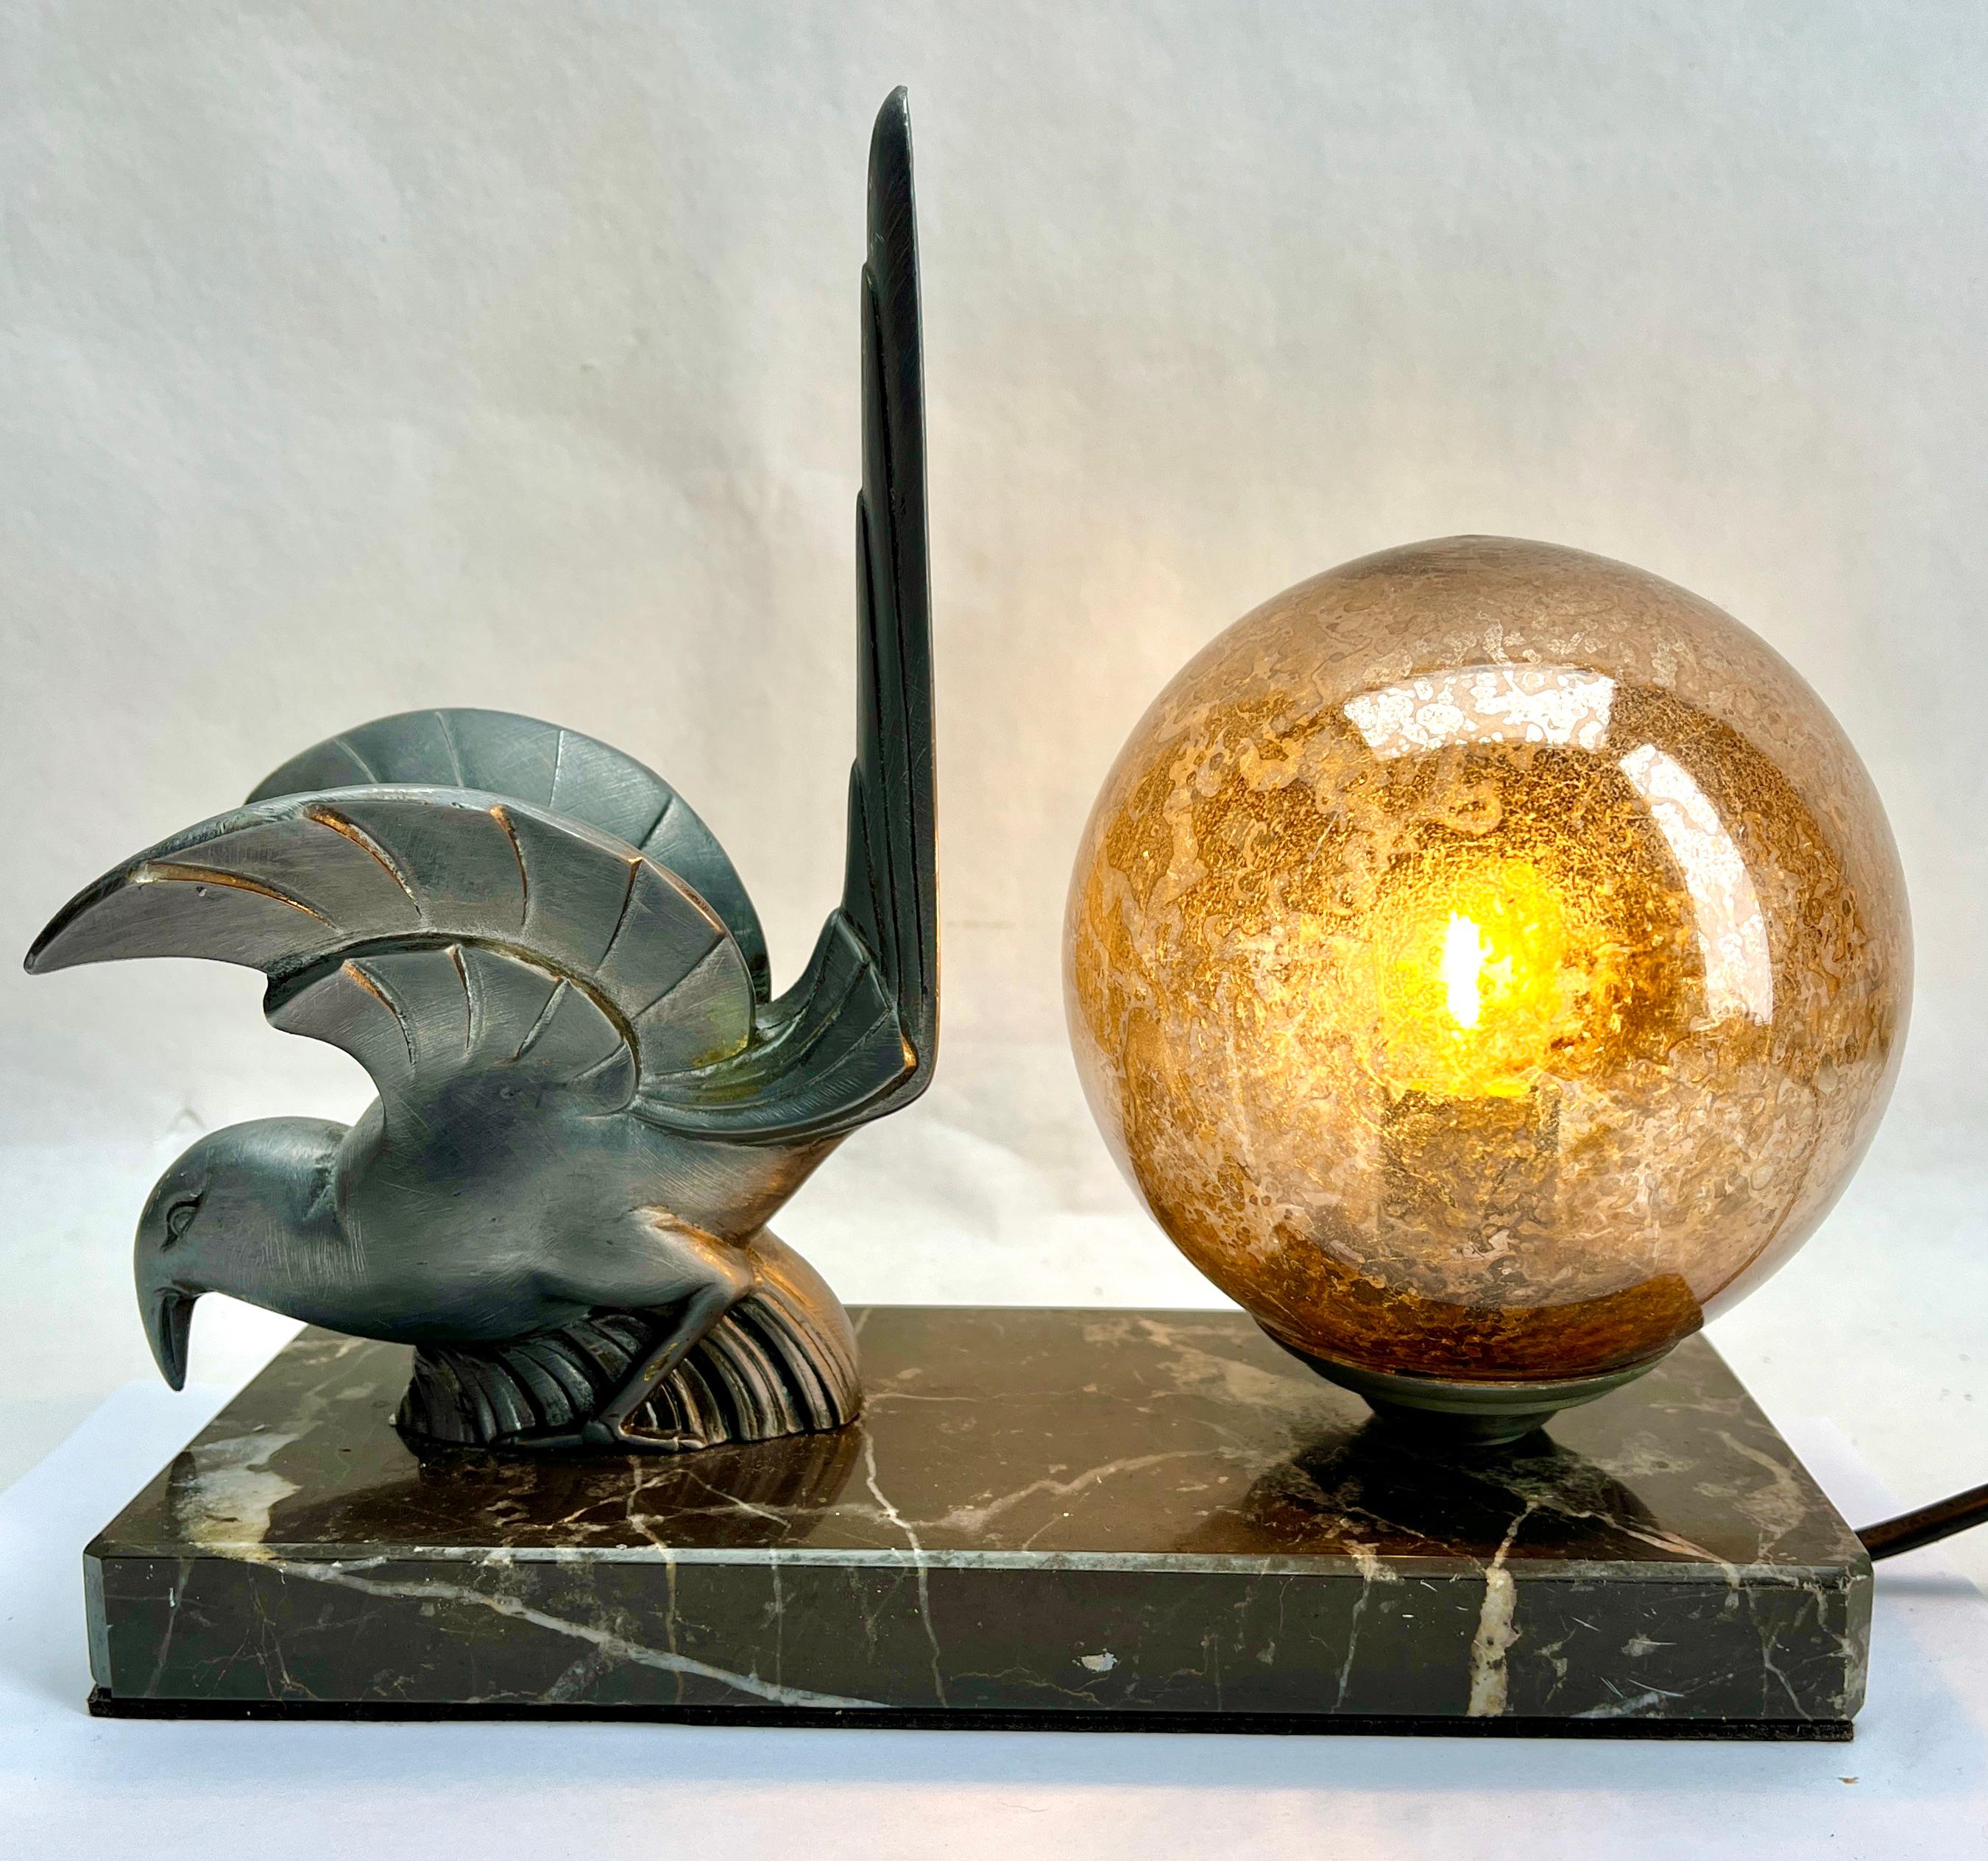 Stunning French Art Deco table lamp Gorgeous glass globe shade.
With Spelter Bird motif. Sitting on a marble base. 
In excellent condition and in full working order. 
Rewiring and Fitting E14
Originel Patina on all Parts
The piece is in excellent